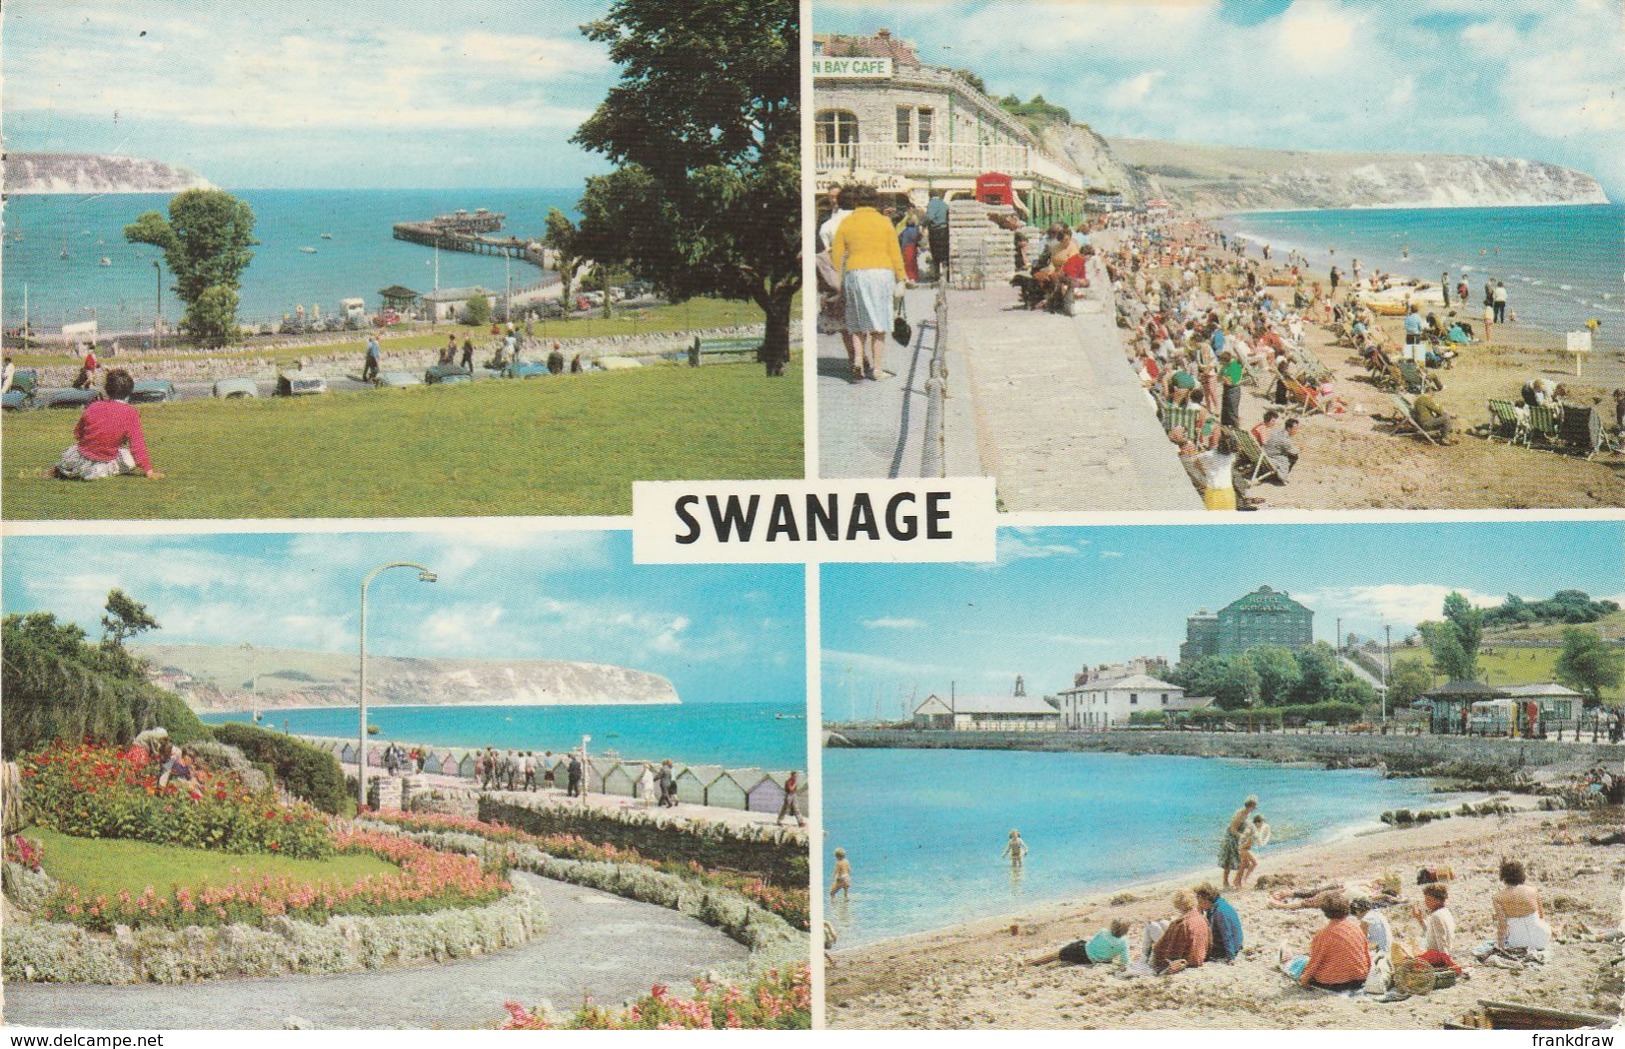 Postcard - Swanage Four Views Card No.2123 Posted 9th Sept 1969 Very Good - Swanage